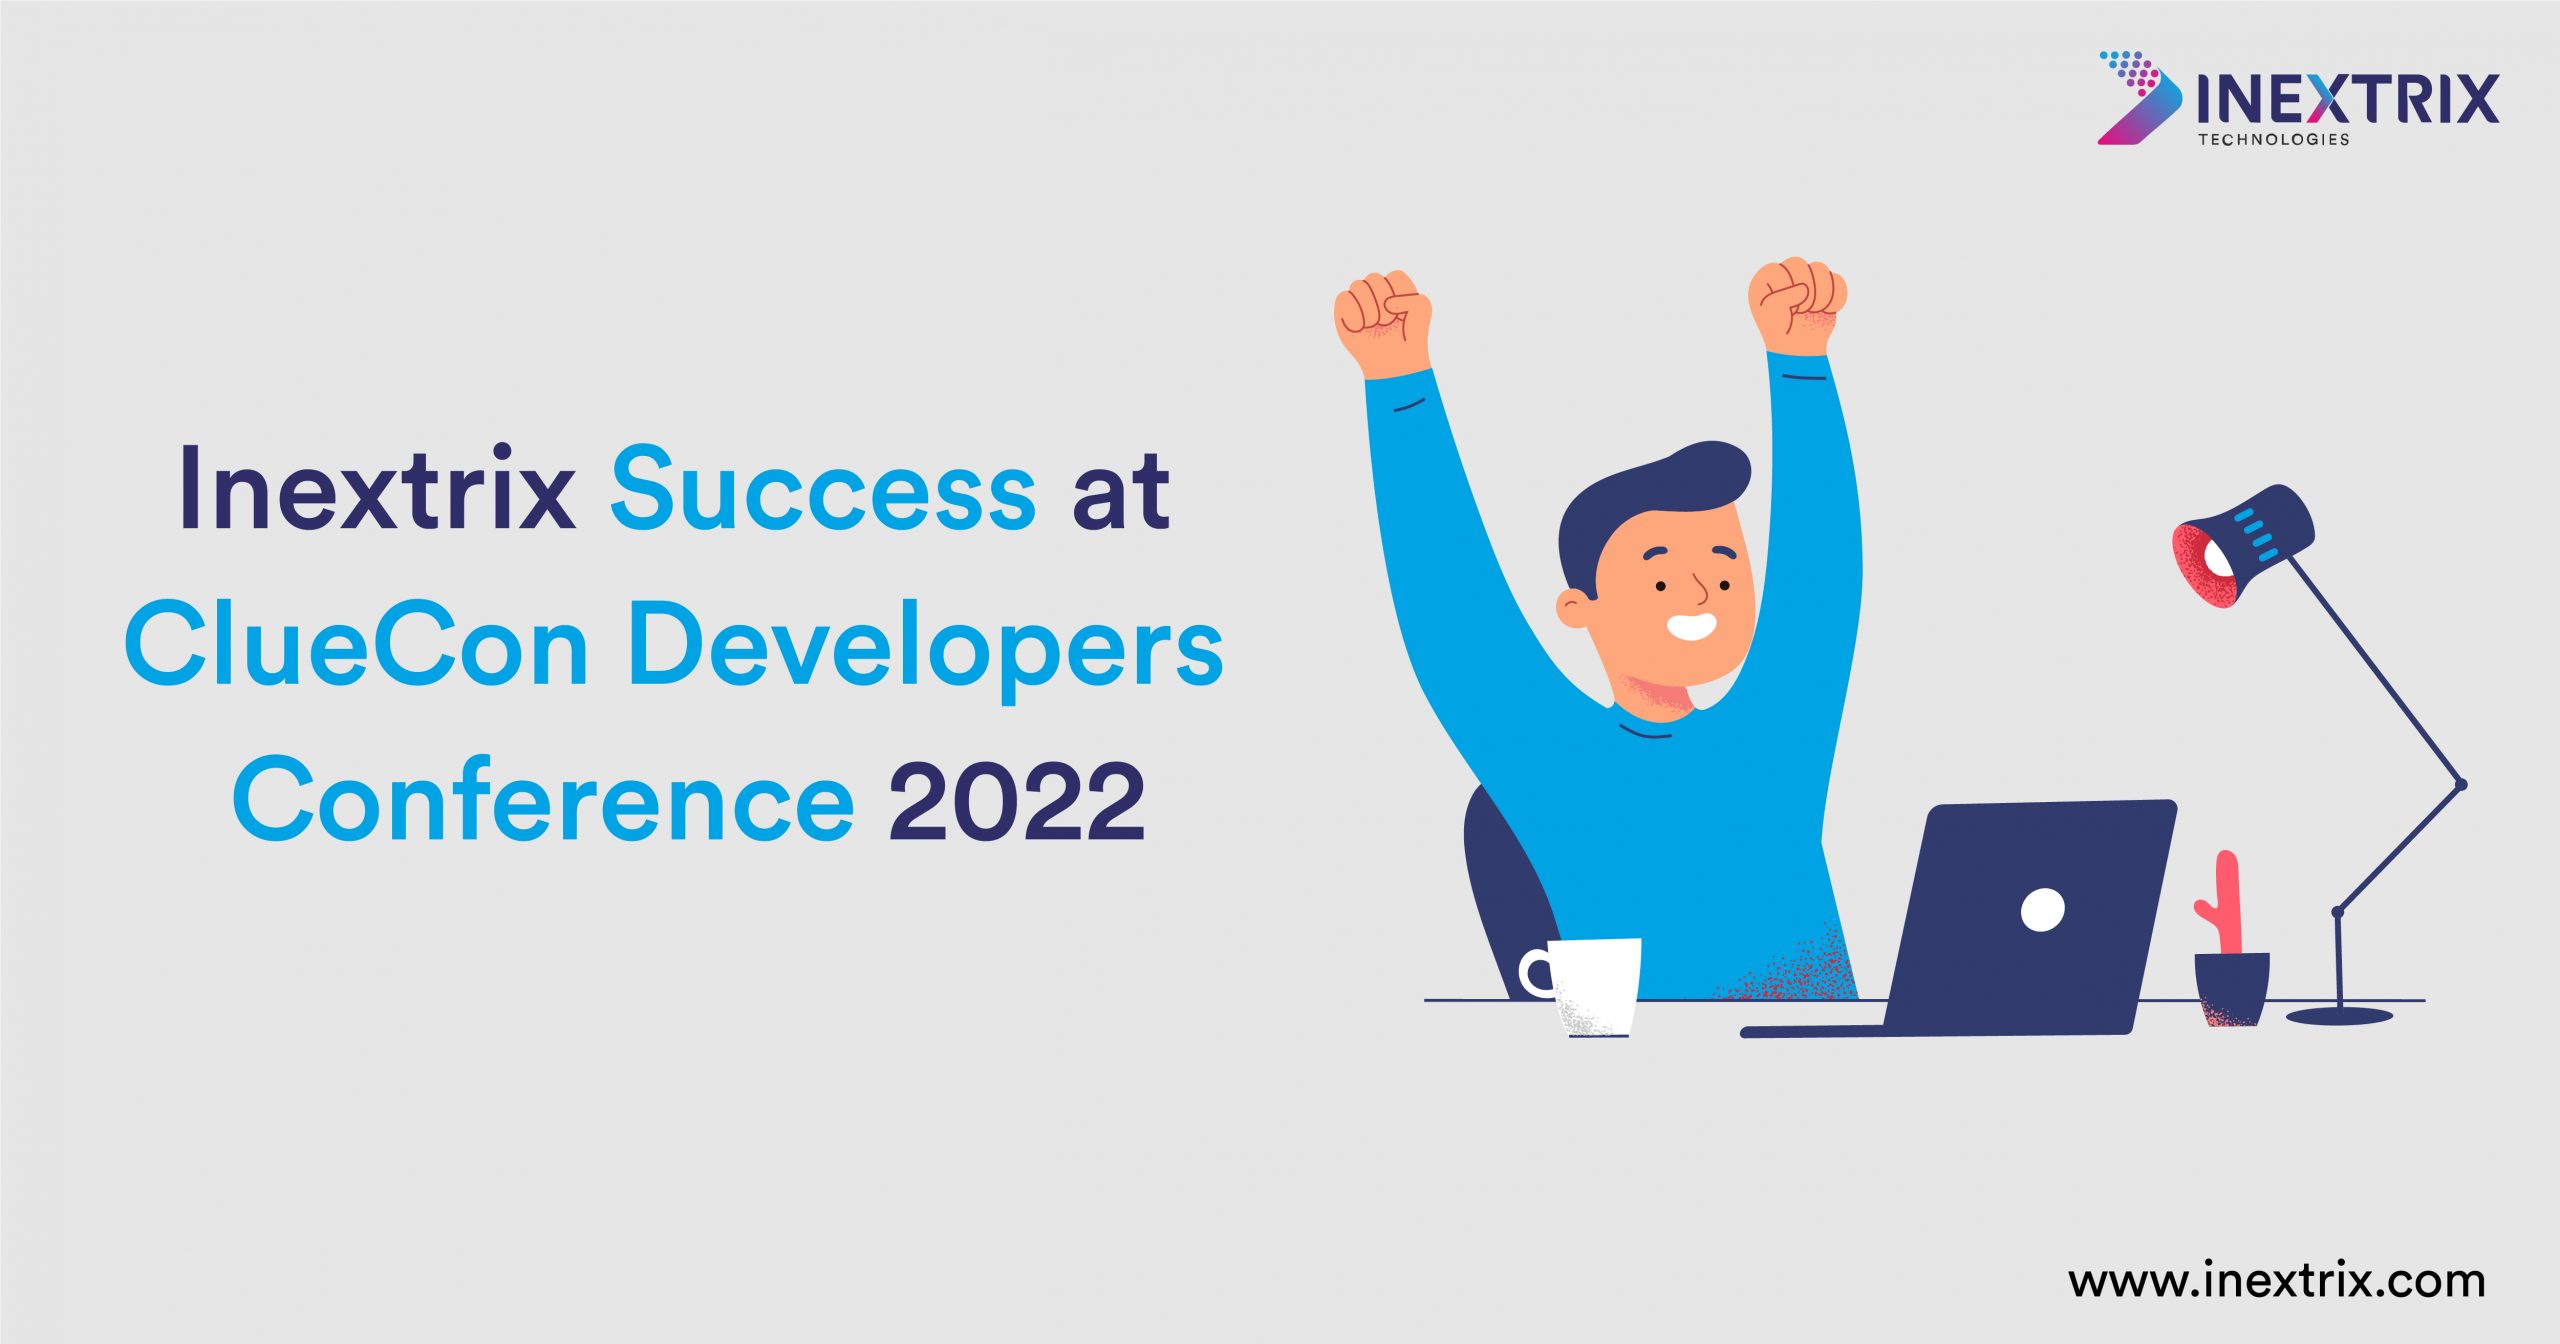 Inextrix Success at ClueCon Developers Conference 2022